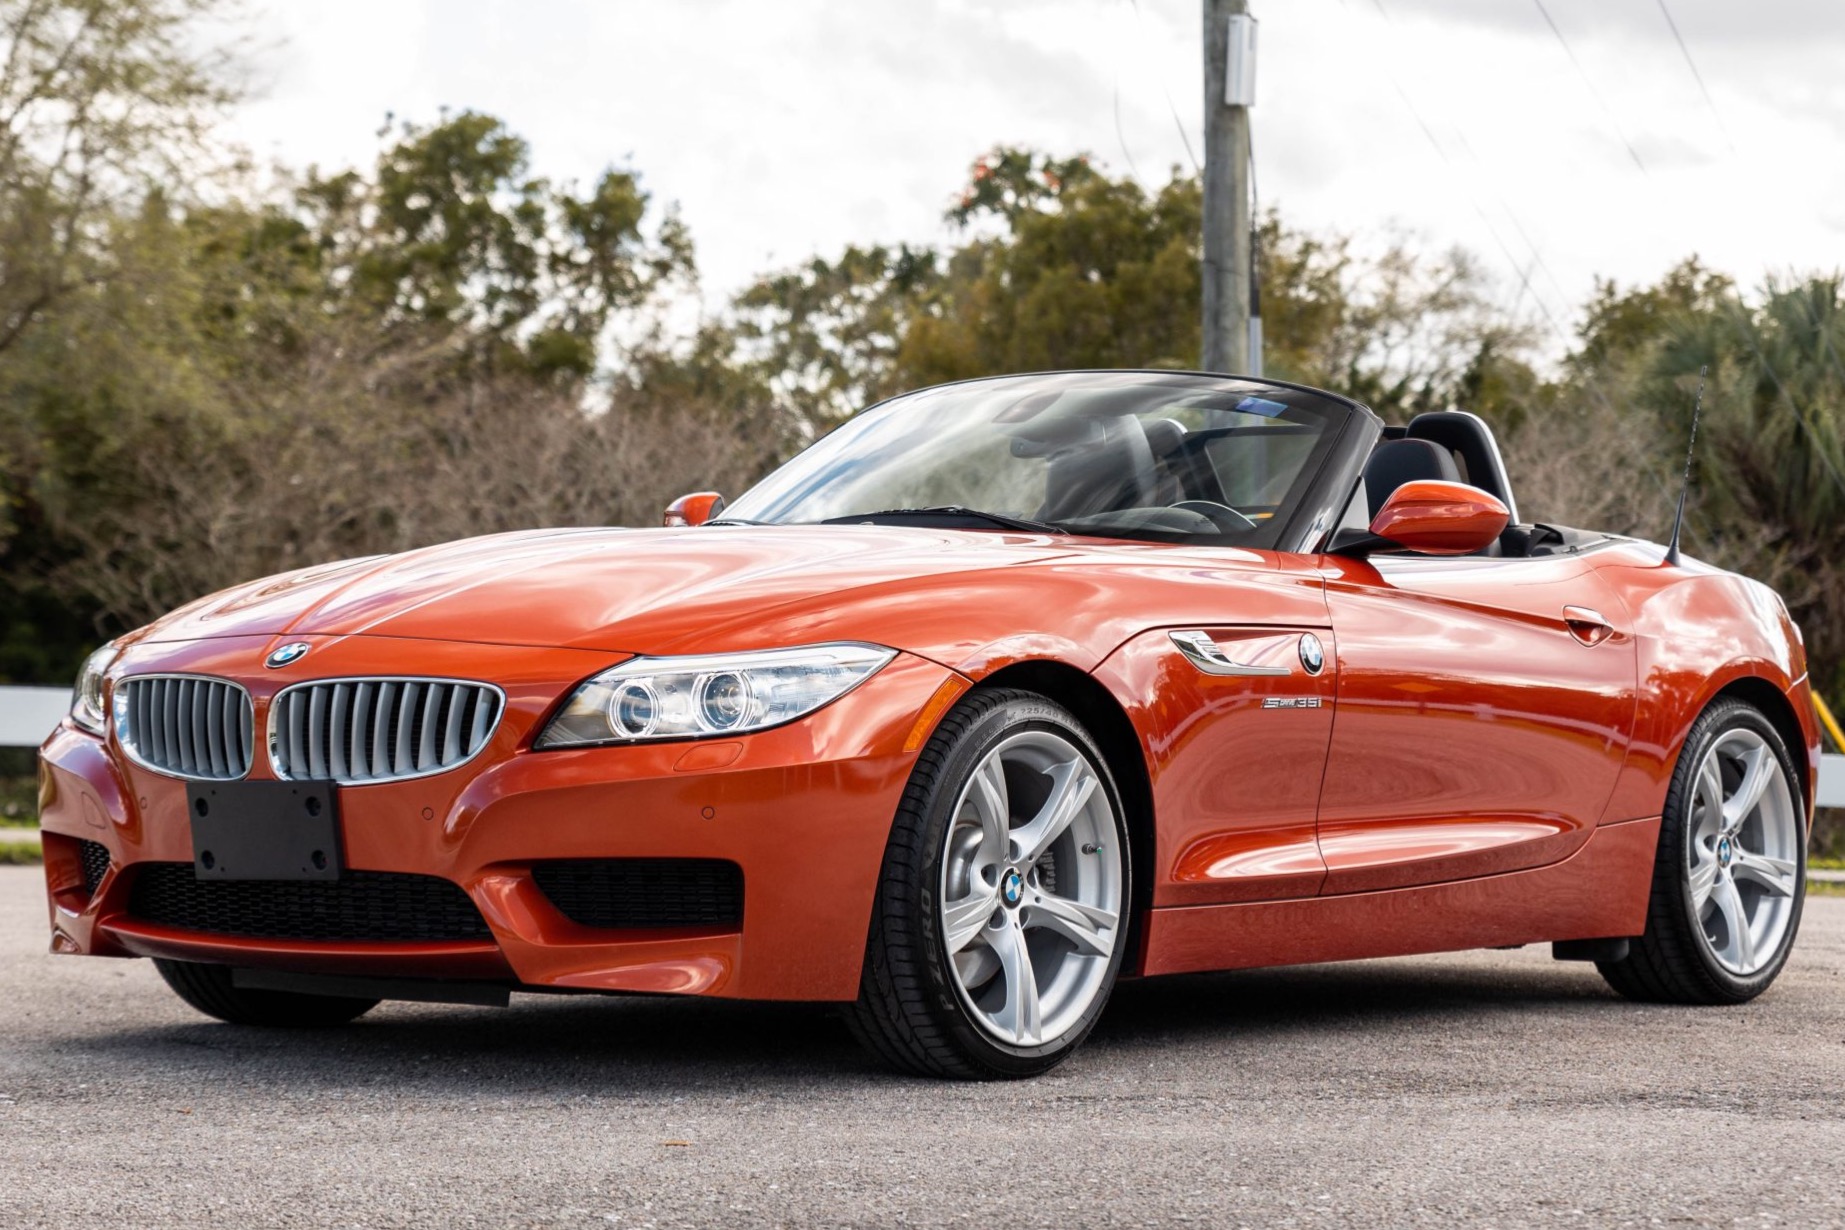 10k-Mile 2014 BMW Z4 sDrive35i M Sport 6-Speed for sale on BaT Auctions -  sold for $51,000 on March 23, 2022 (Lot #68,690) | Bring a Trailer